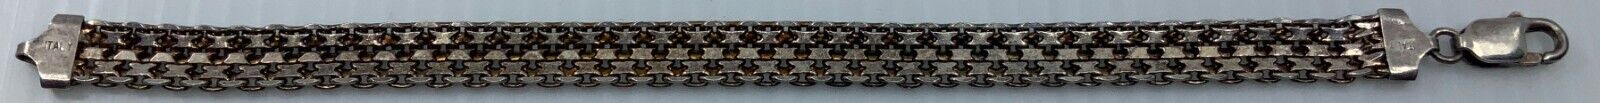 Vintage Jewelry OLD Sterling Silver Bracelet with Clasp 185mm GIFT DEAL i115109